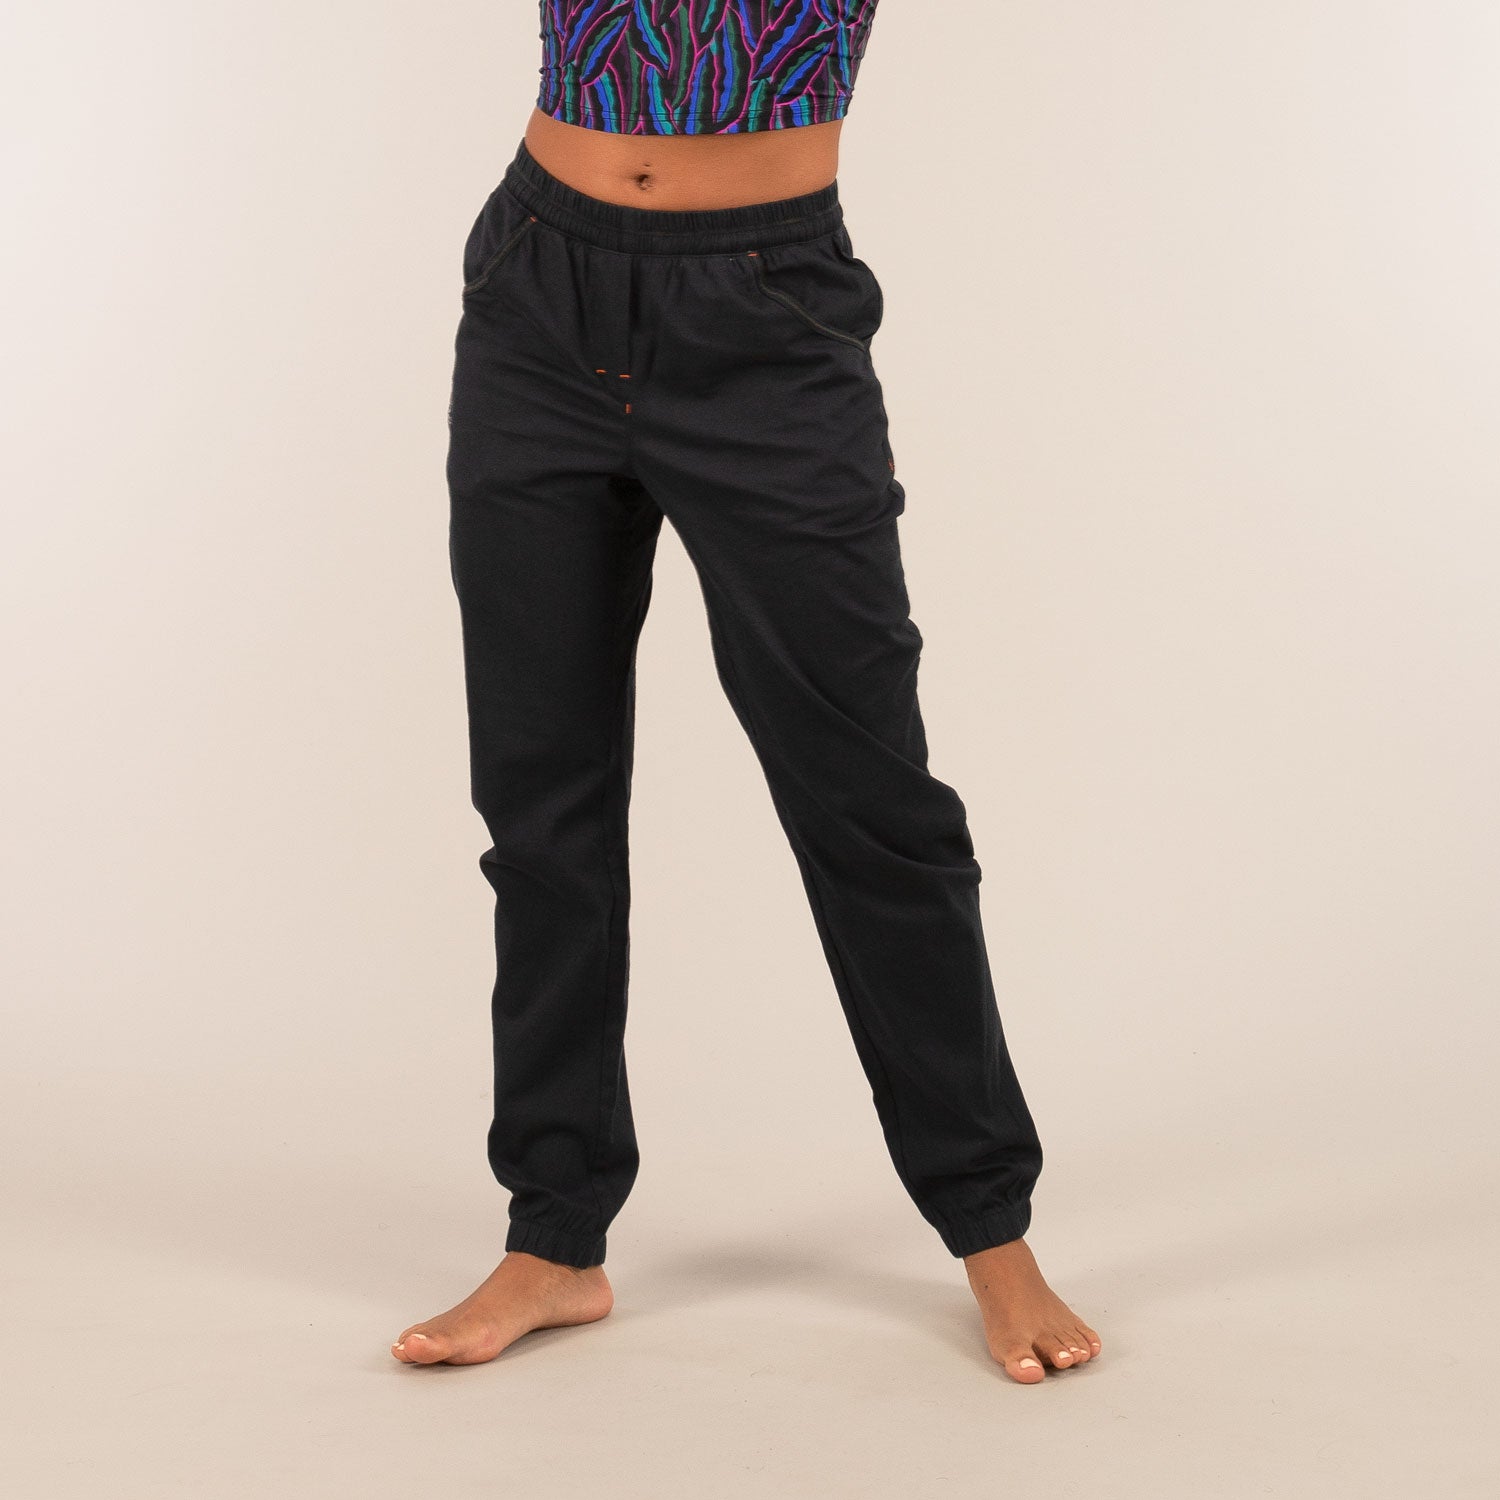 MARGO Adventure Trousers | Organic Cotton Outdoor Trousers | 3RD ROCK Clothing - Kendal is 5ft 7" with a 28" waist, 38" hips and wears a size 30/RL F F